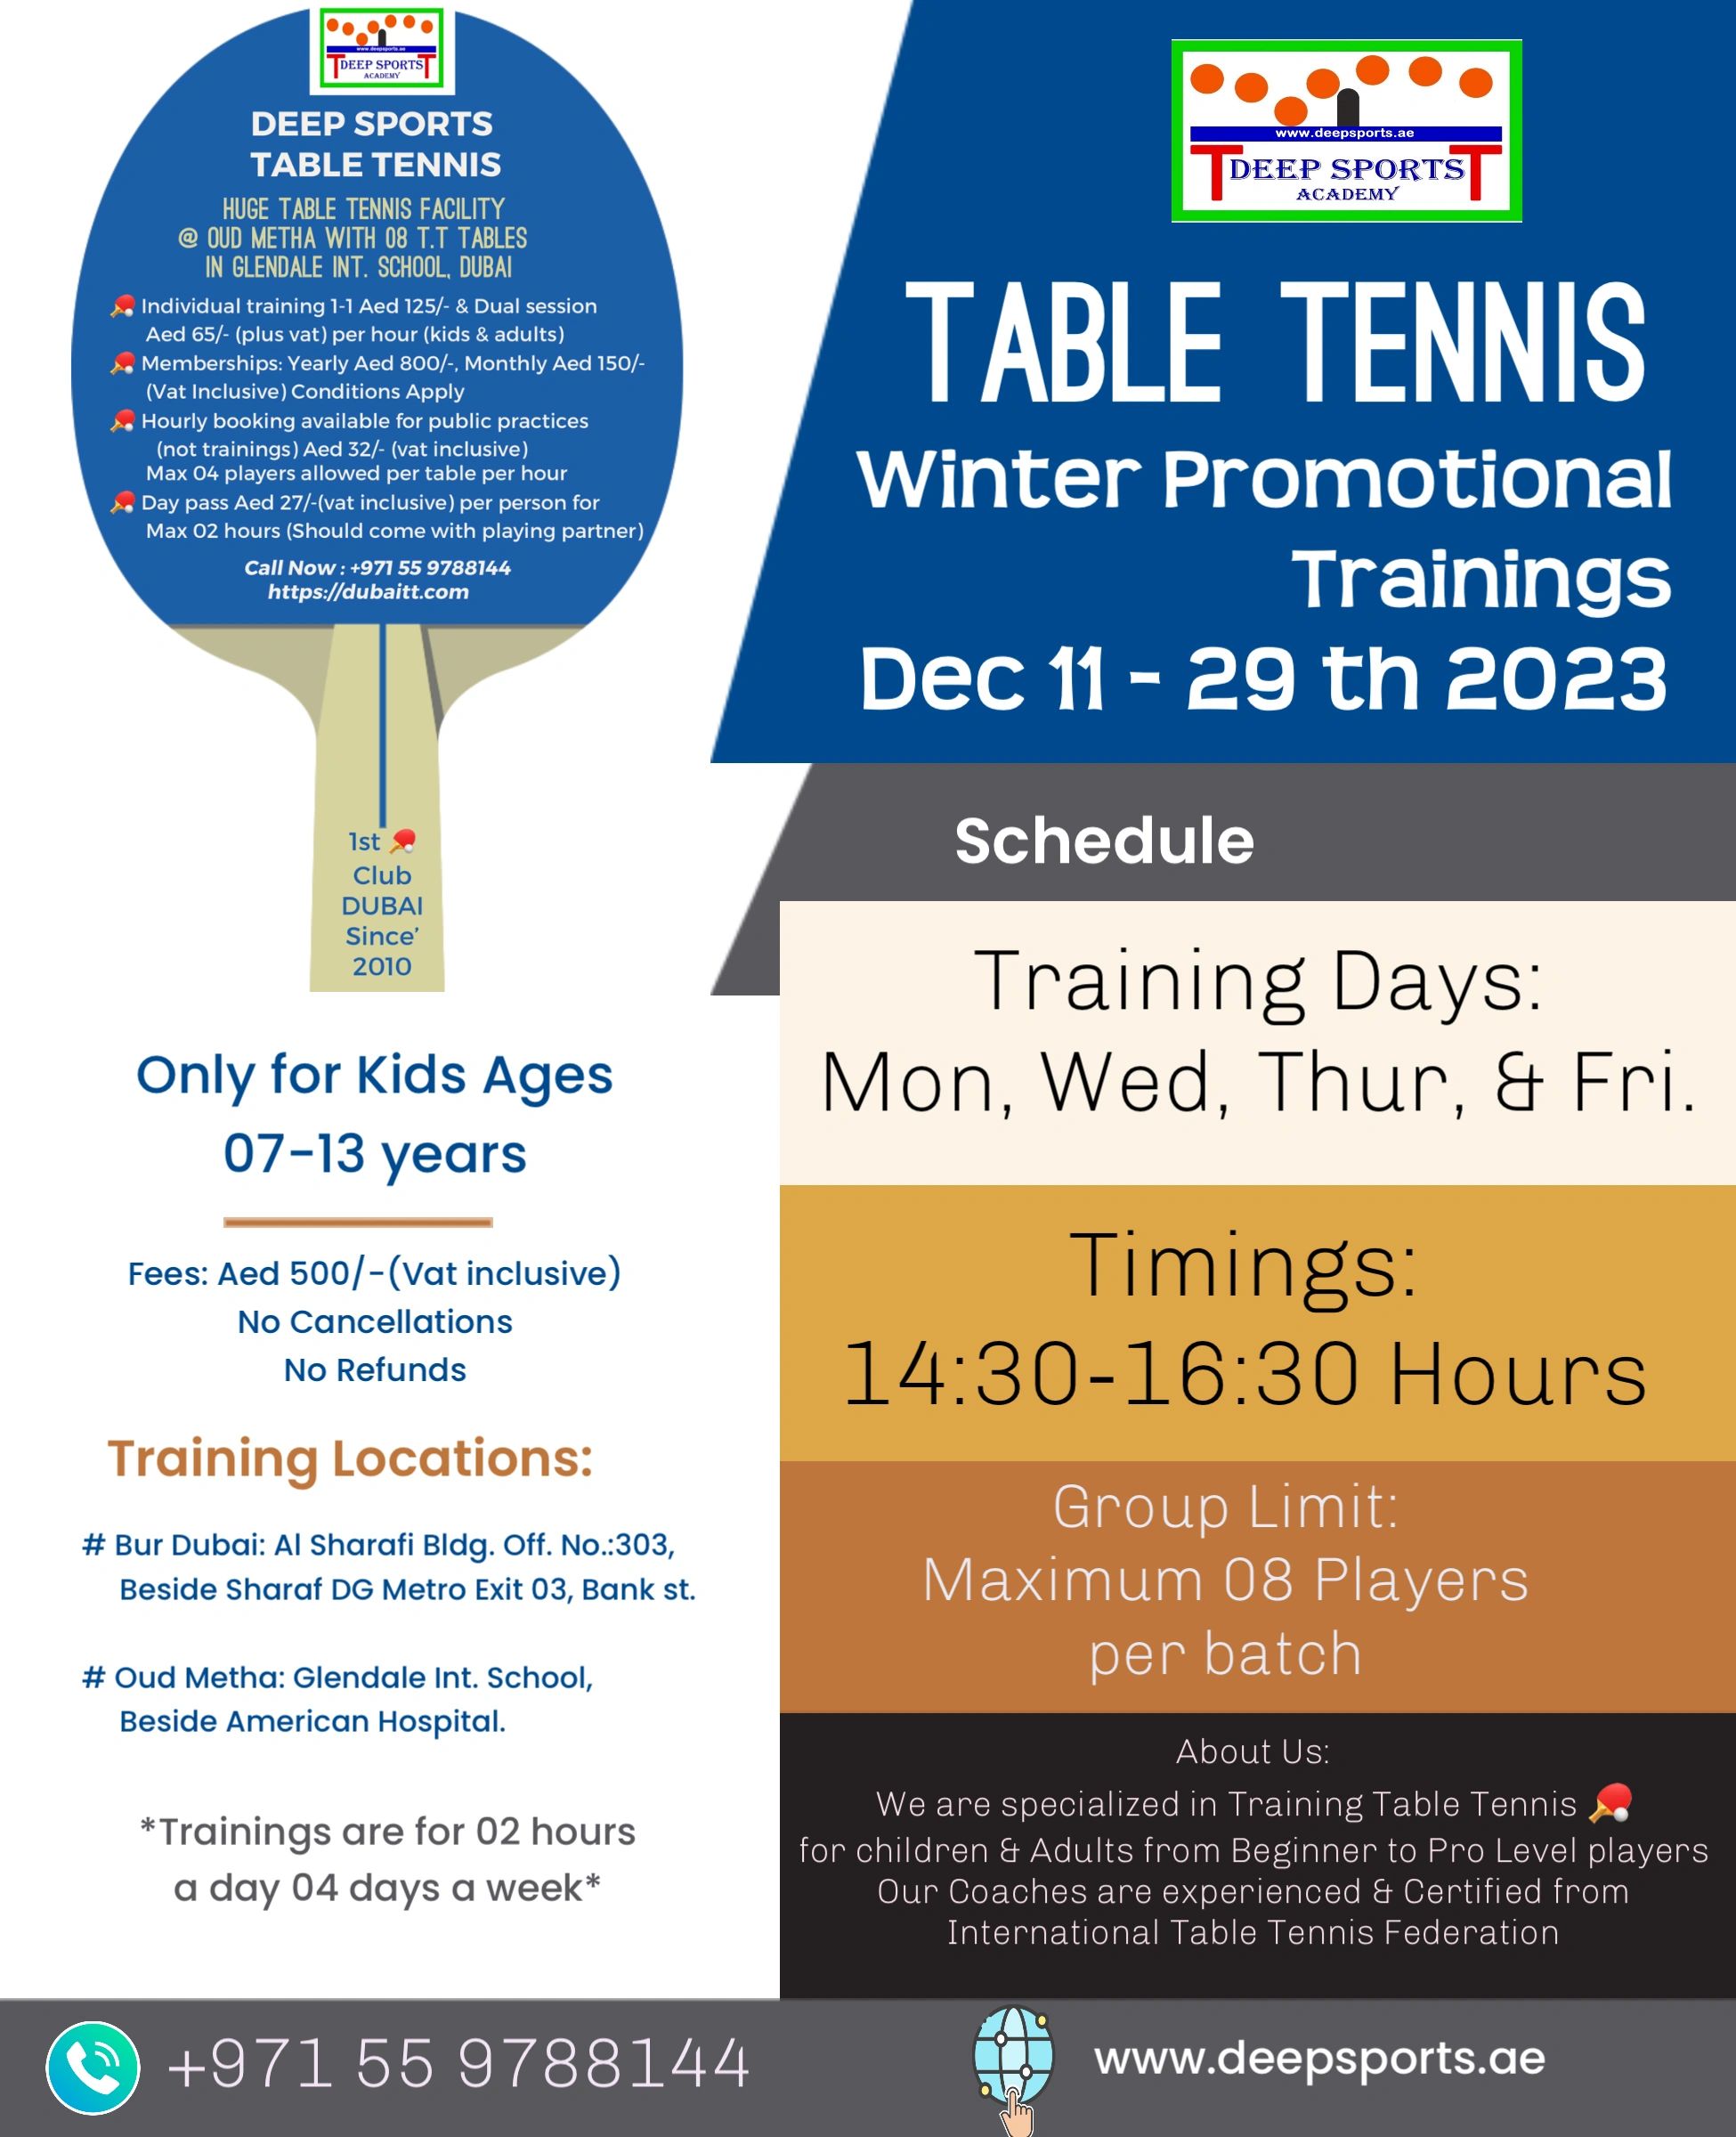 Winter Promotional Table Tennis Training for kids ages 07-13 years from Dec 12th-29th 2023. 